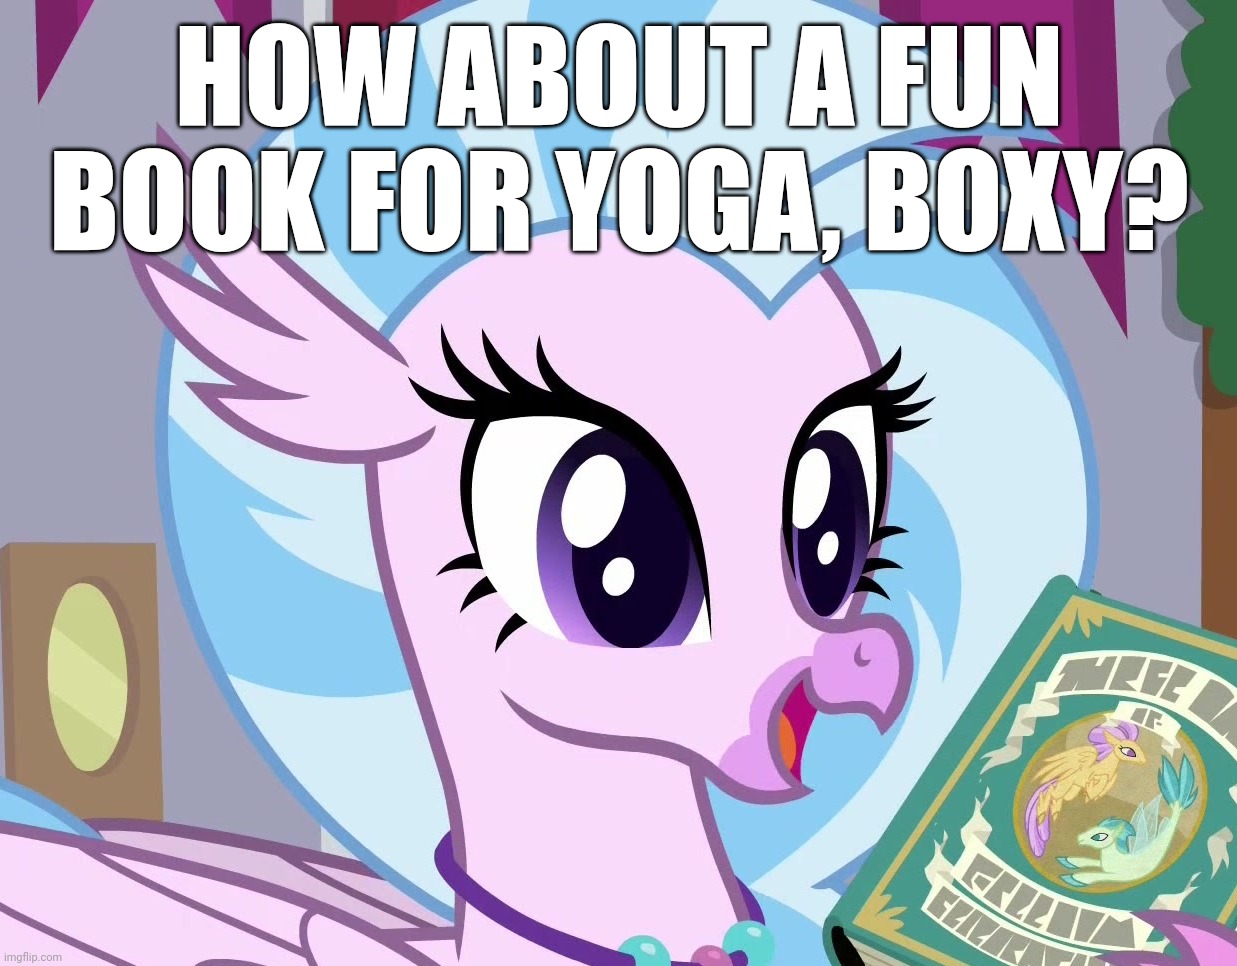 HOW ABOUT A FUN BOOK FOR YOGA, BOXY? | made w/ Imgflip meme maker